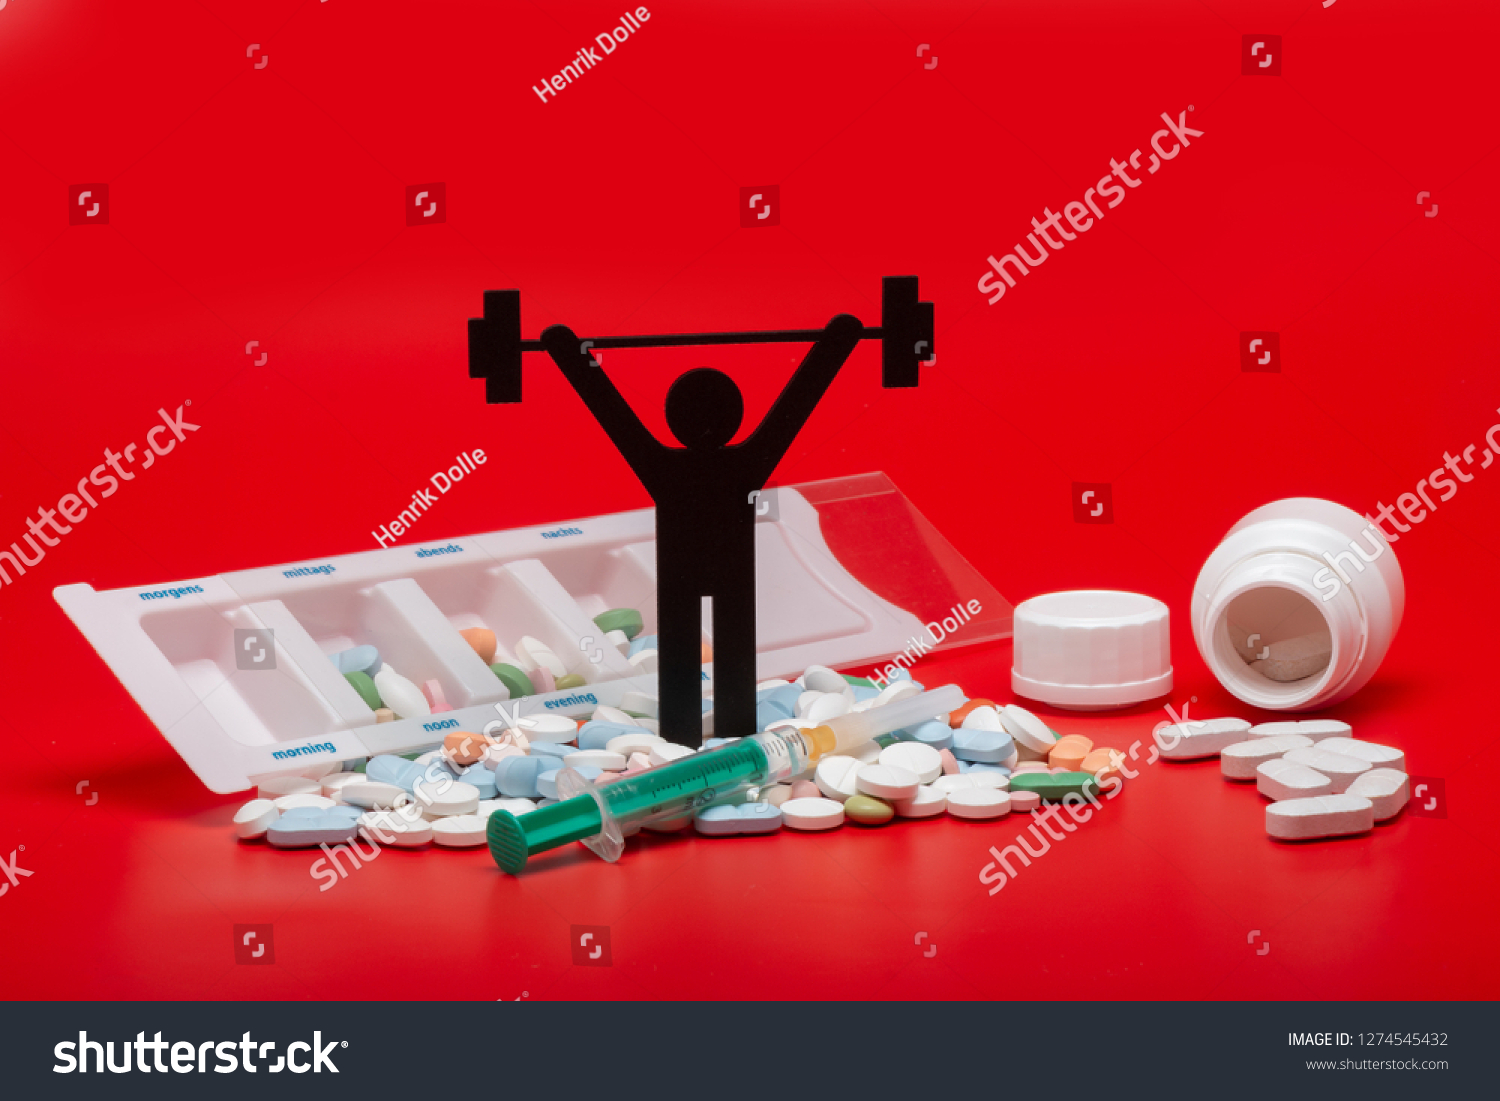 weightlifting pictogram with pills and red background #1274545432